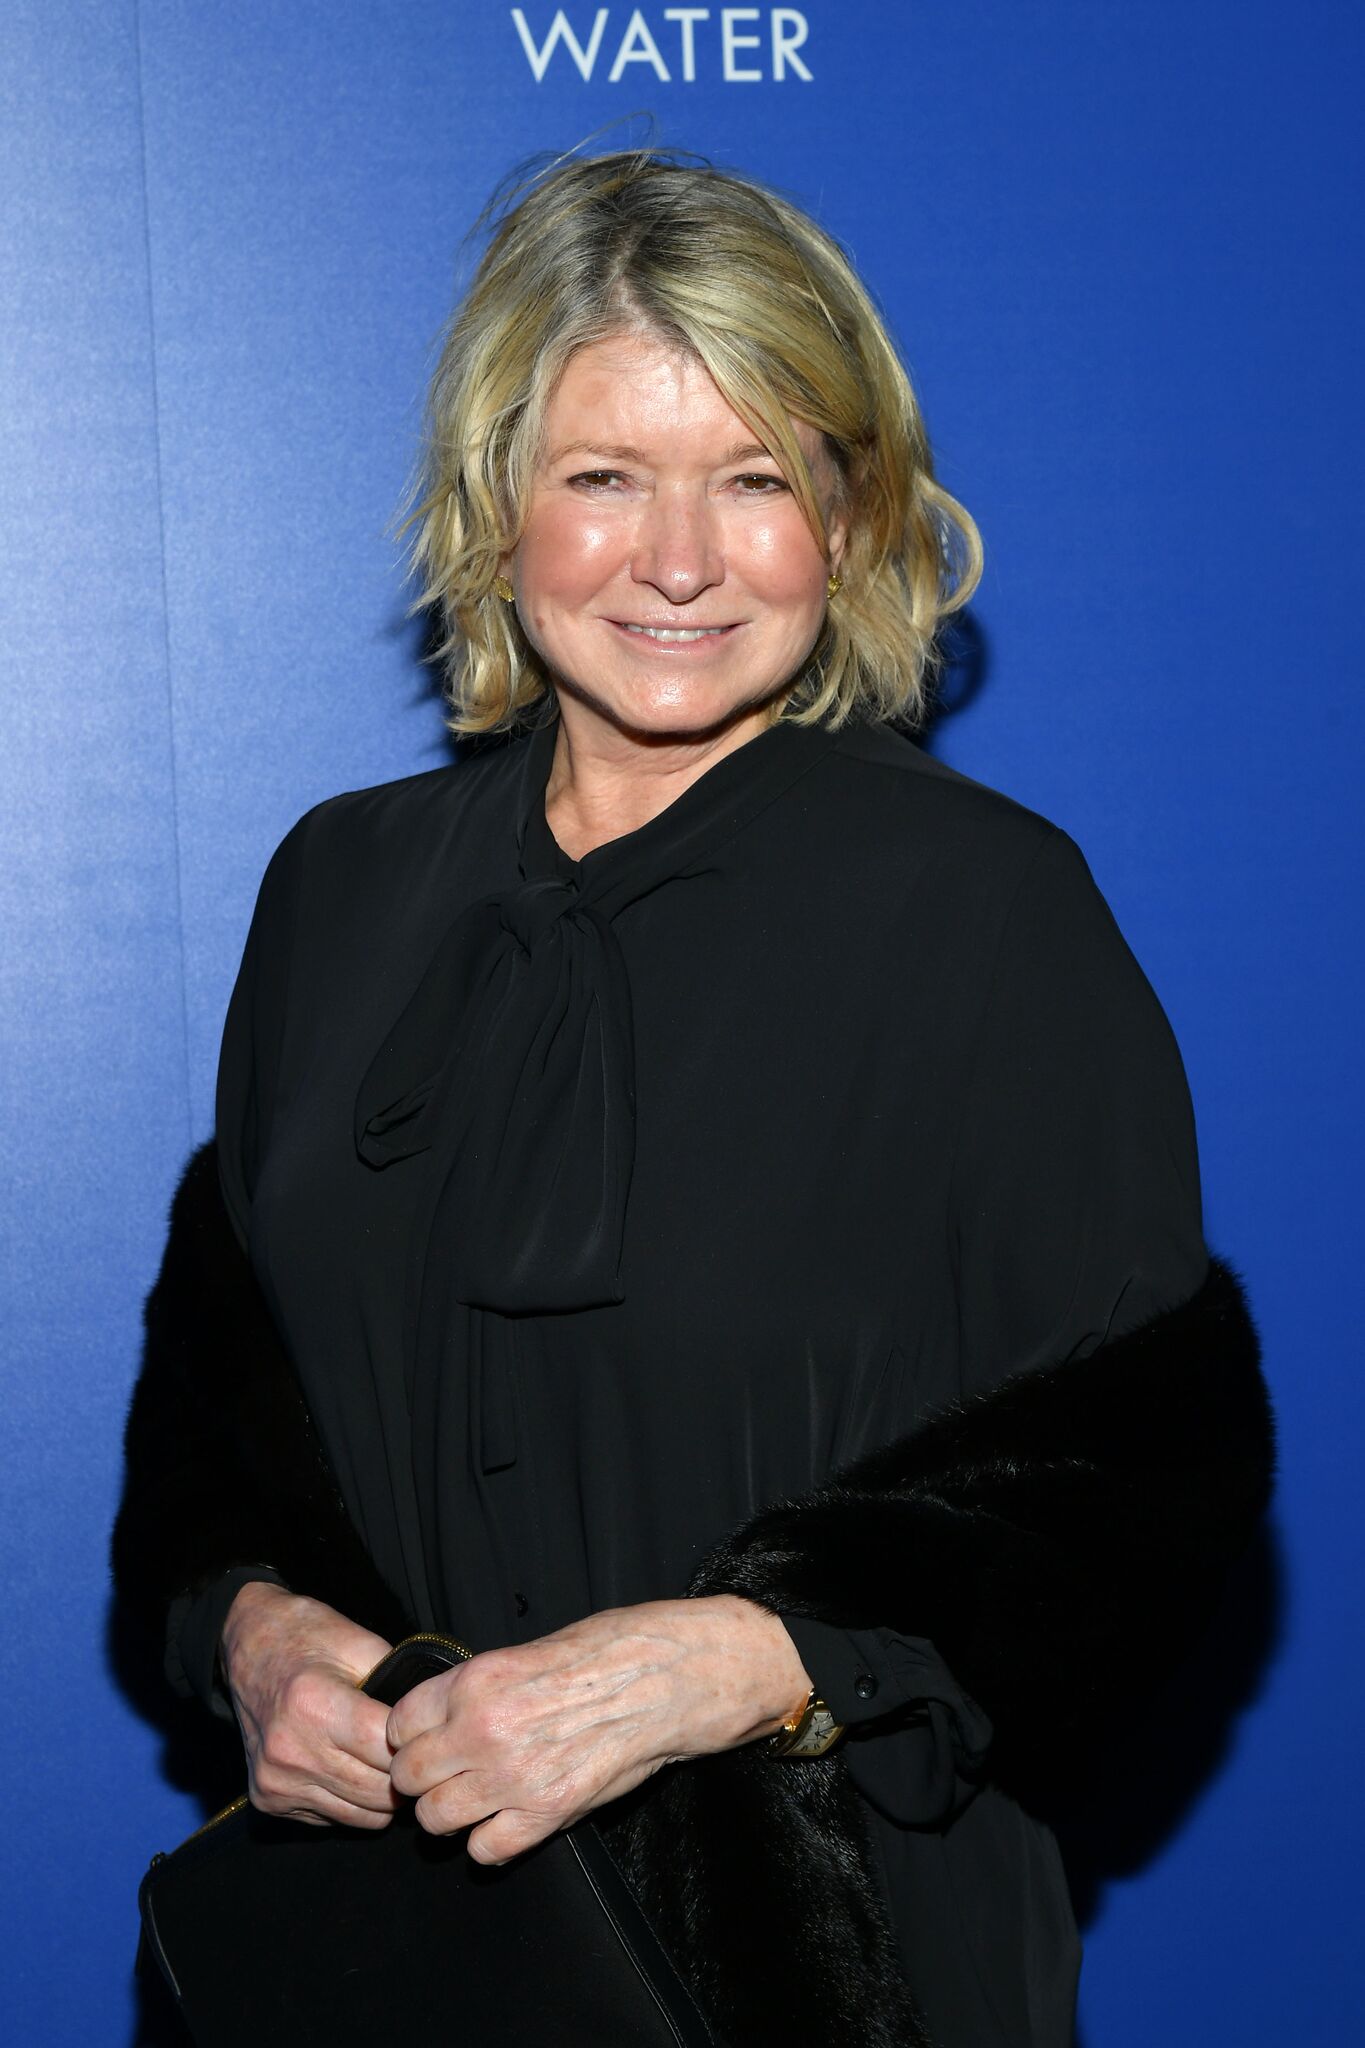  Martha Stewart attends the "Mary Poppins Returns" hosted by The Cinema Society at SVA Theater  | Getty Images